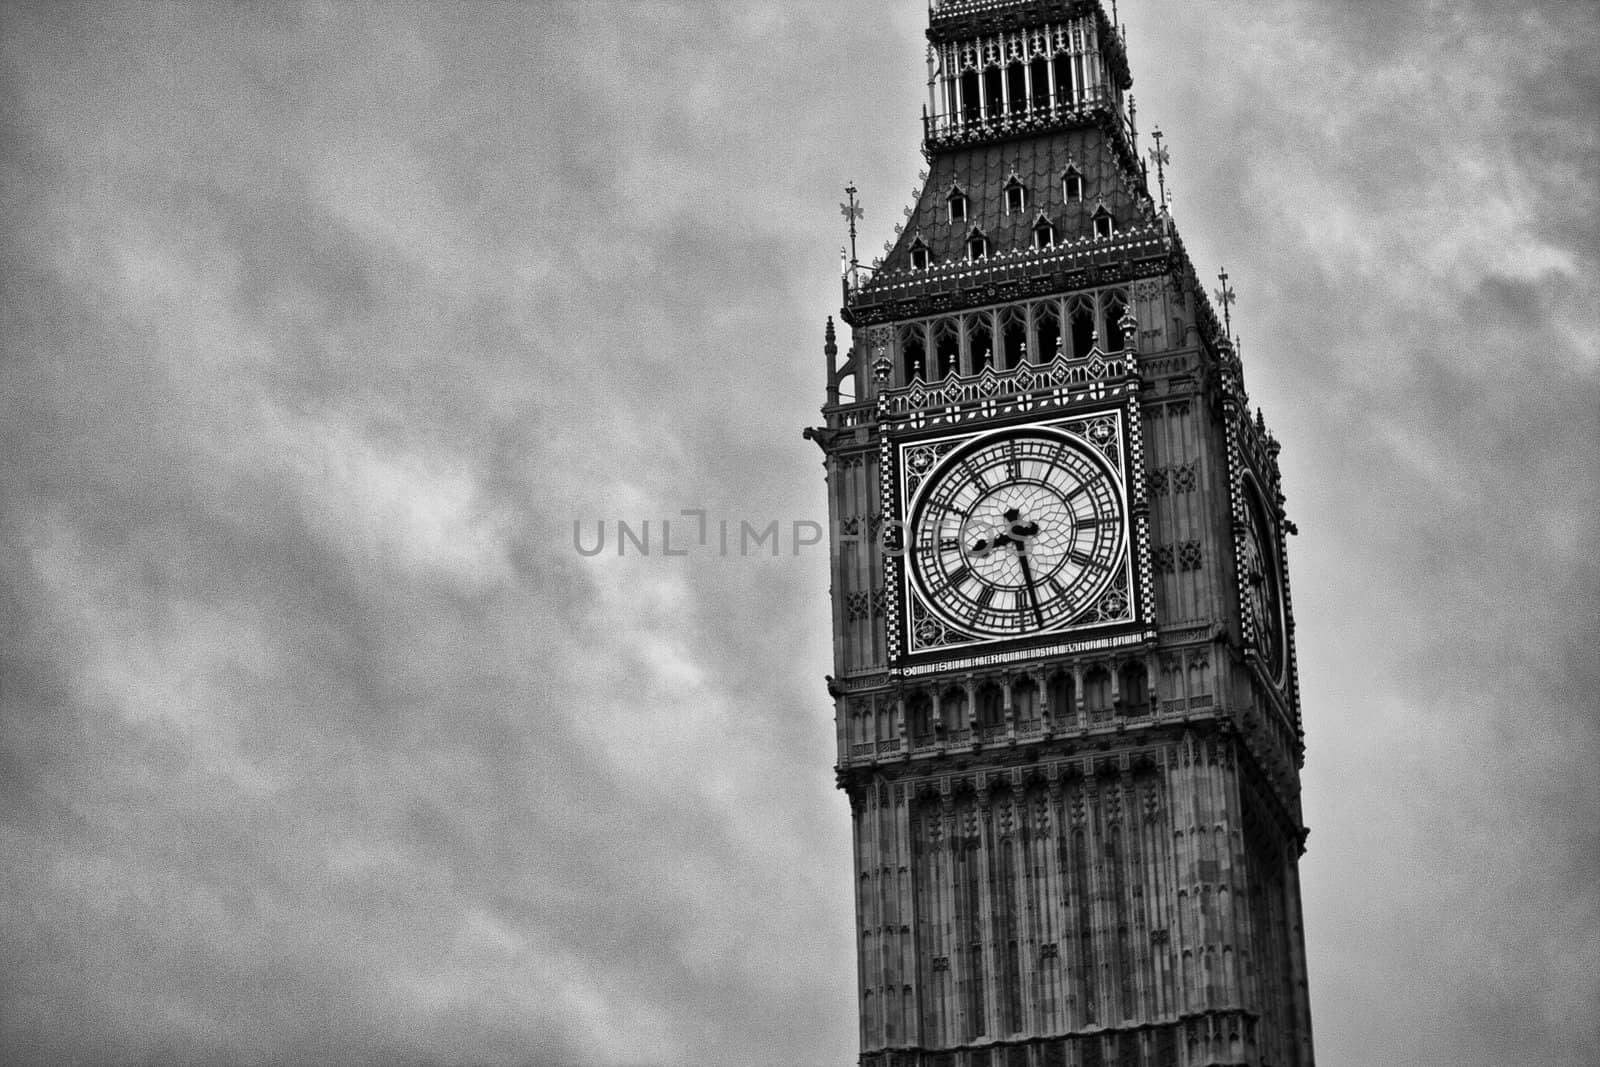 The spire of the Big Ben clocktower on the Houses of Parliament, London , England by jrock635